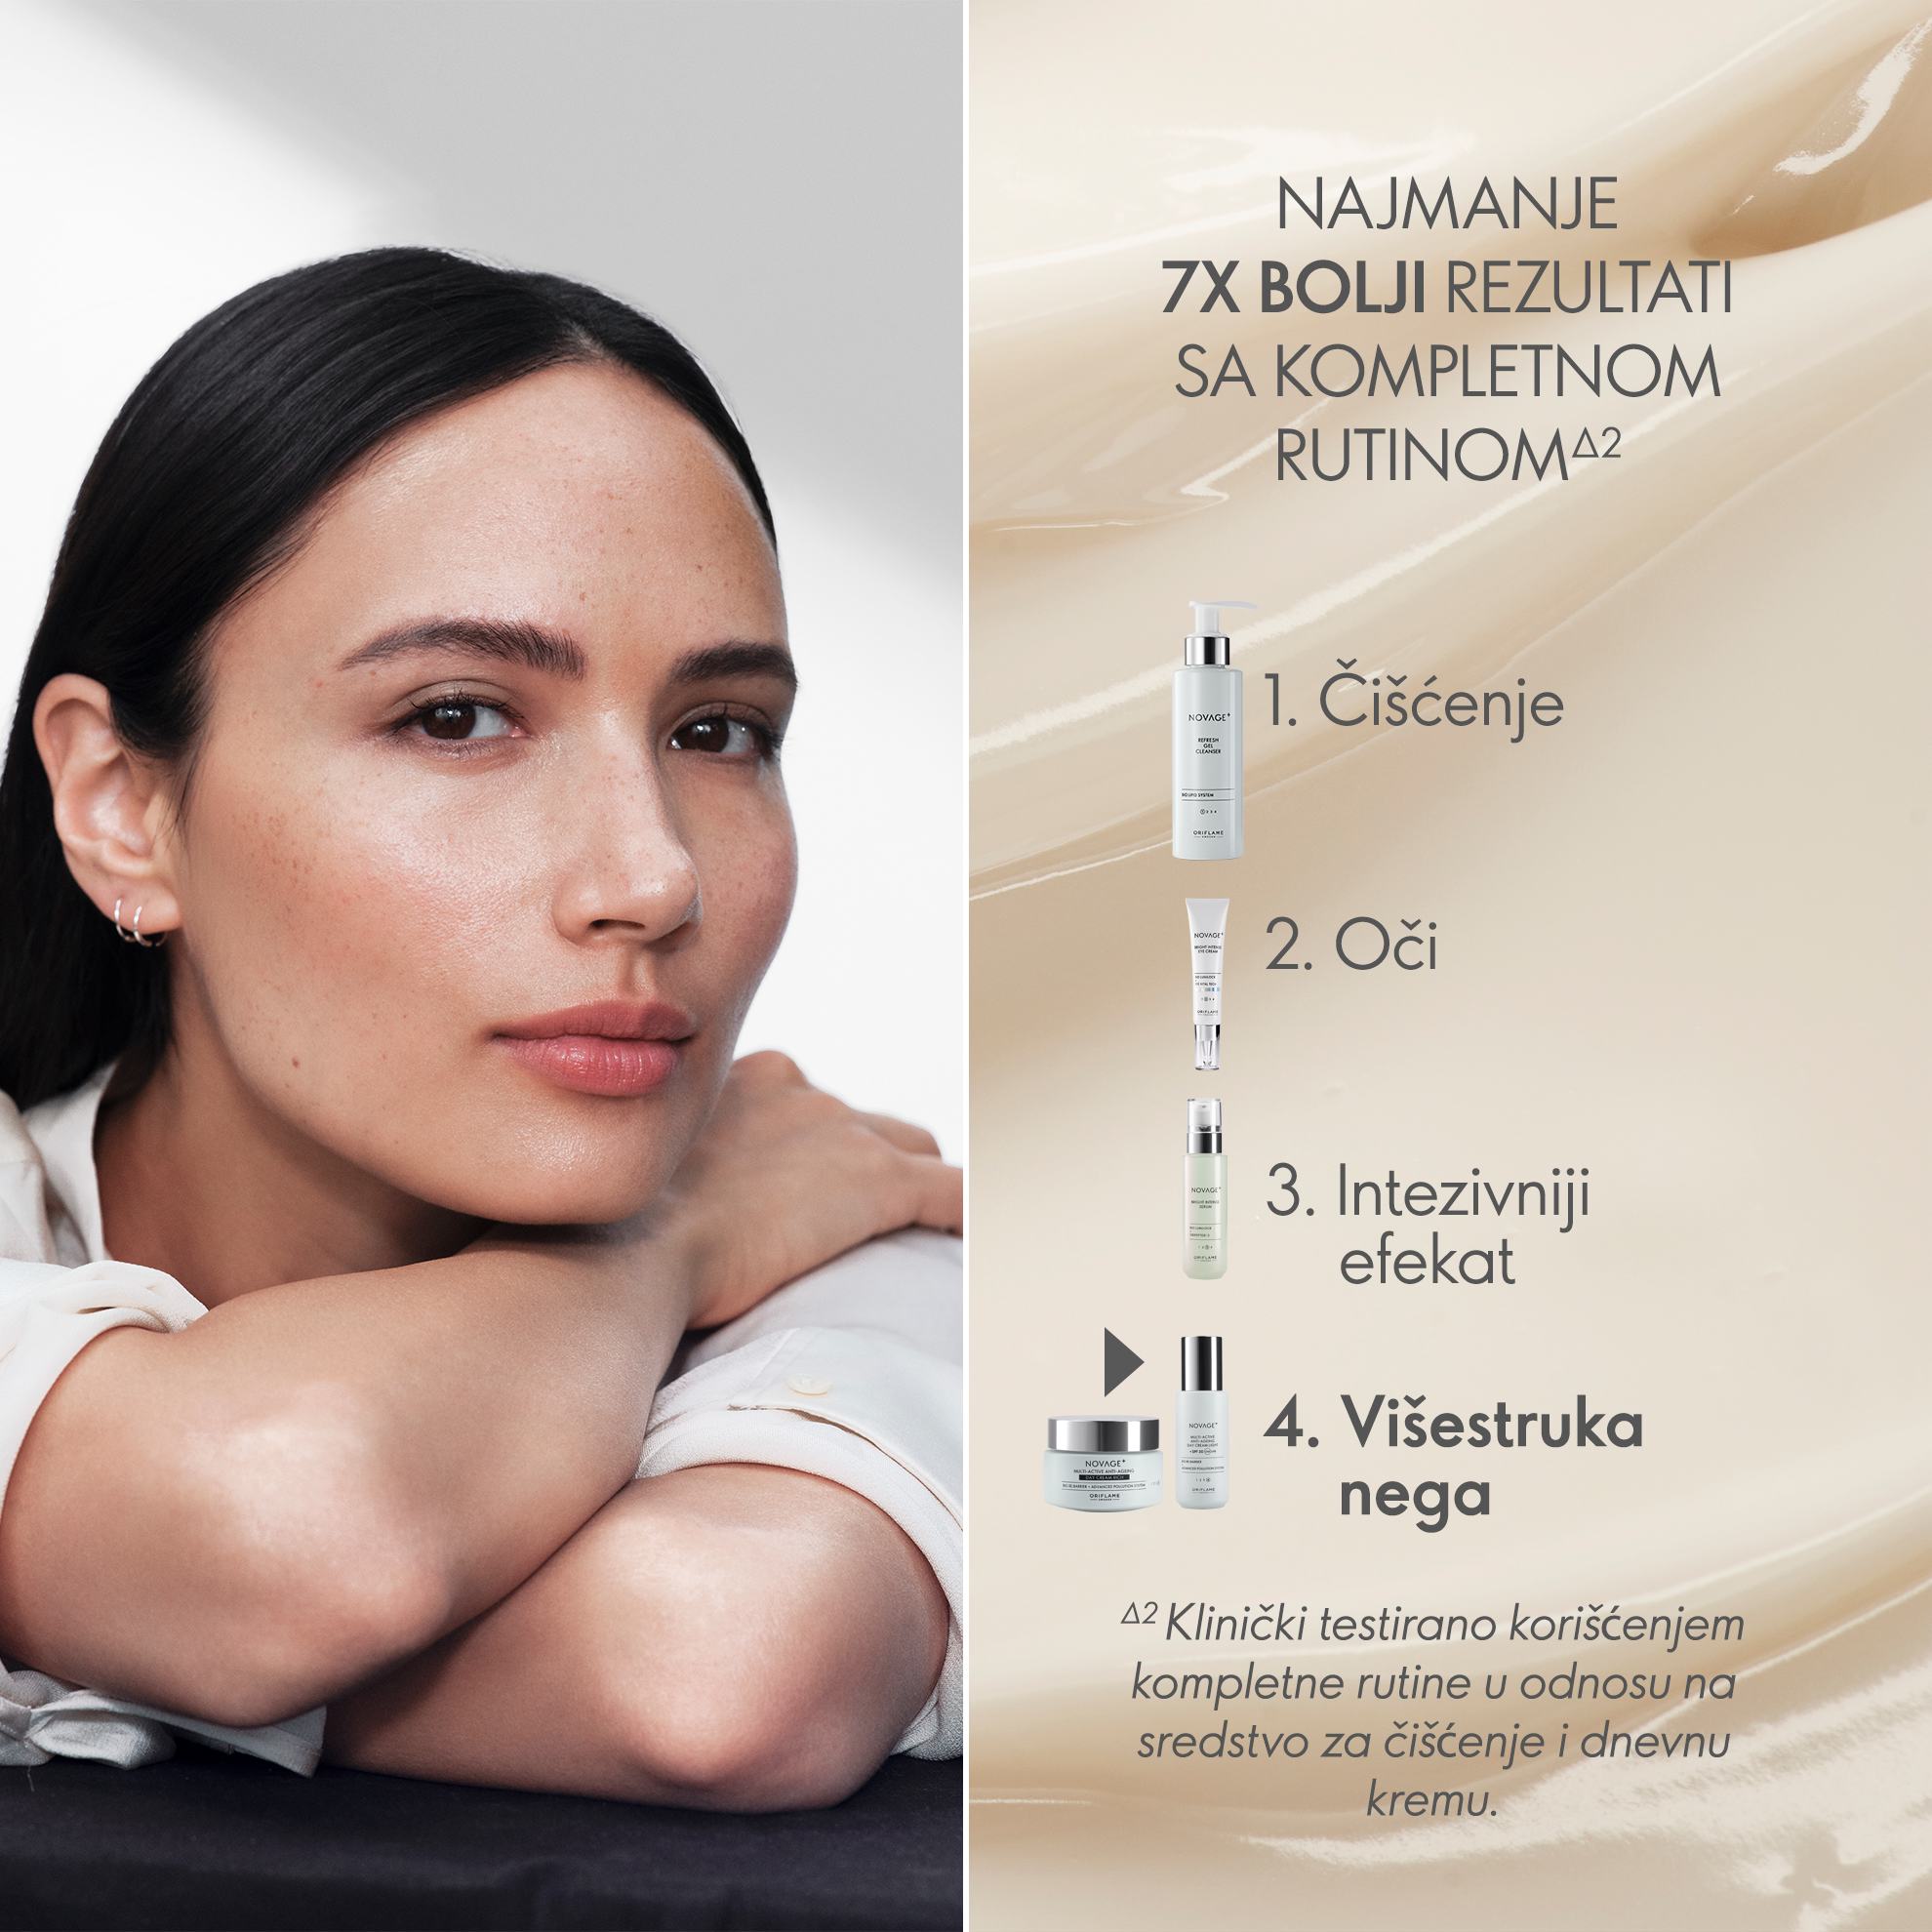 https://media-cdn.oriflame.com/productImage?externalMediaId=product-management-media%2fProducts%2f41047%2fRS%2f41047_5.png&id=17551312&version=2